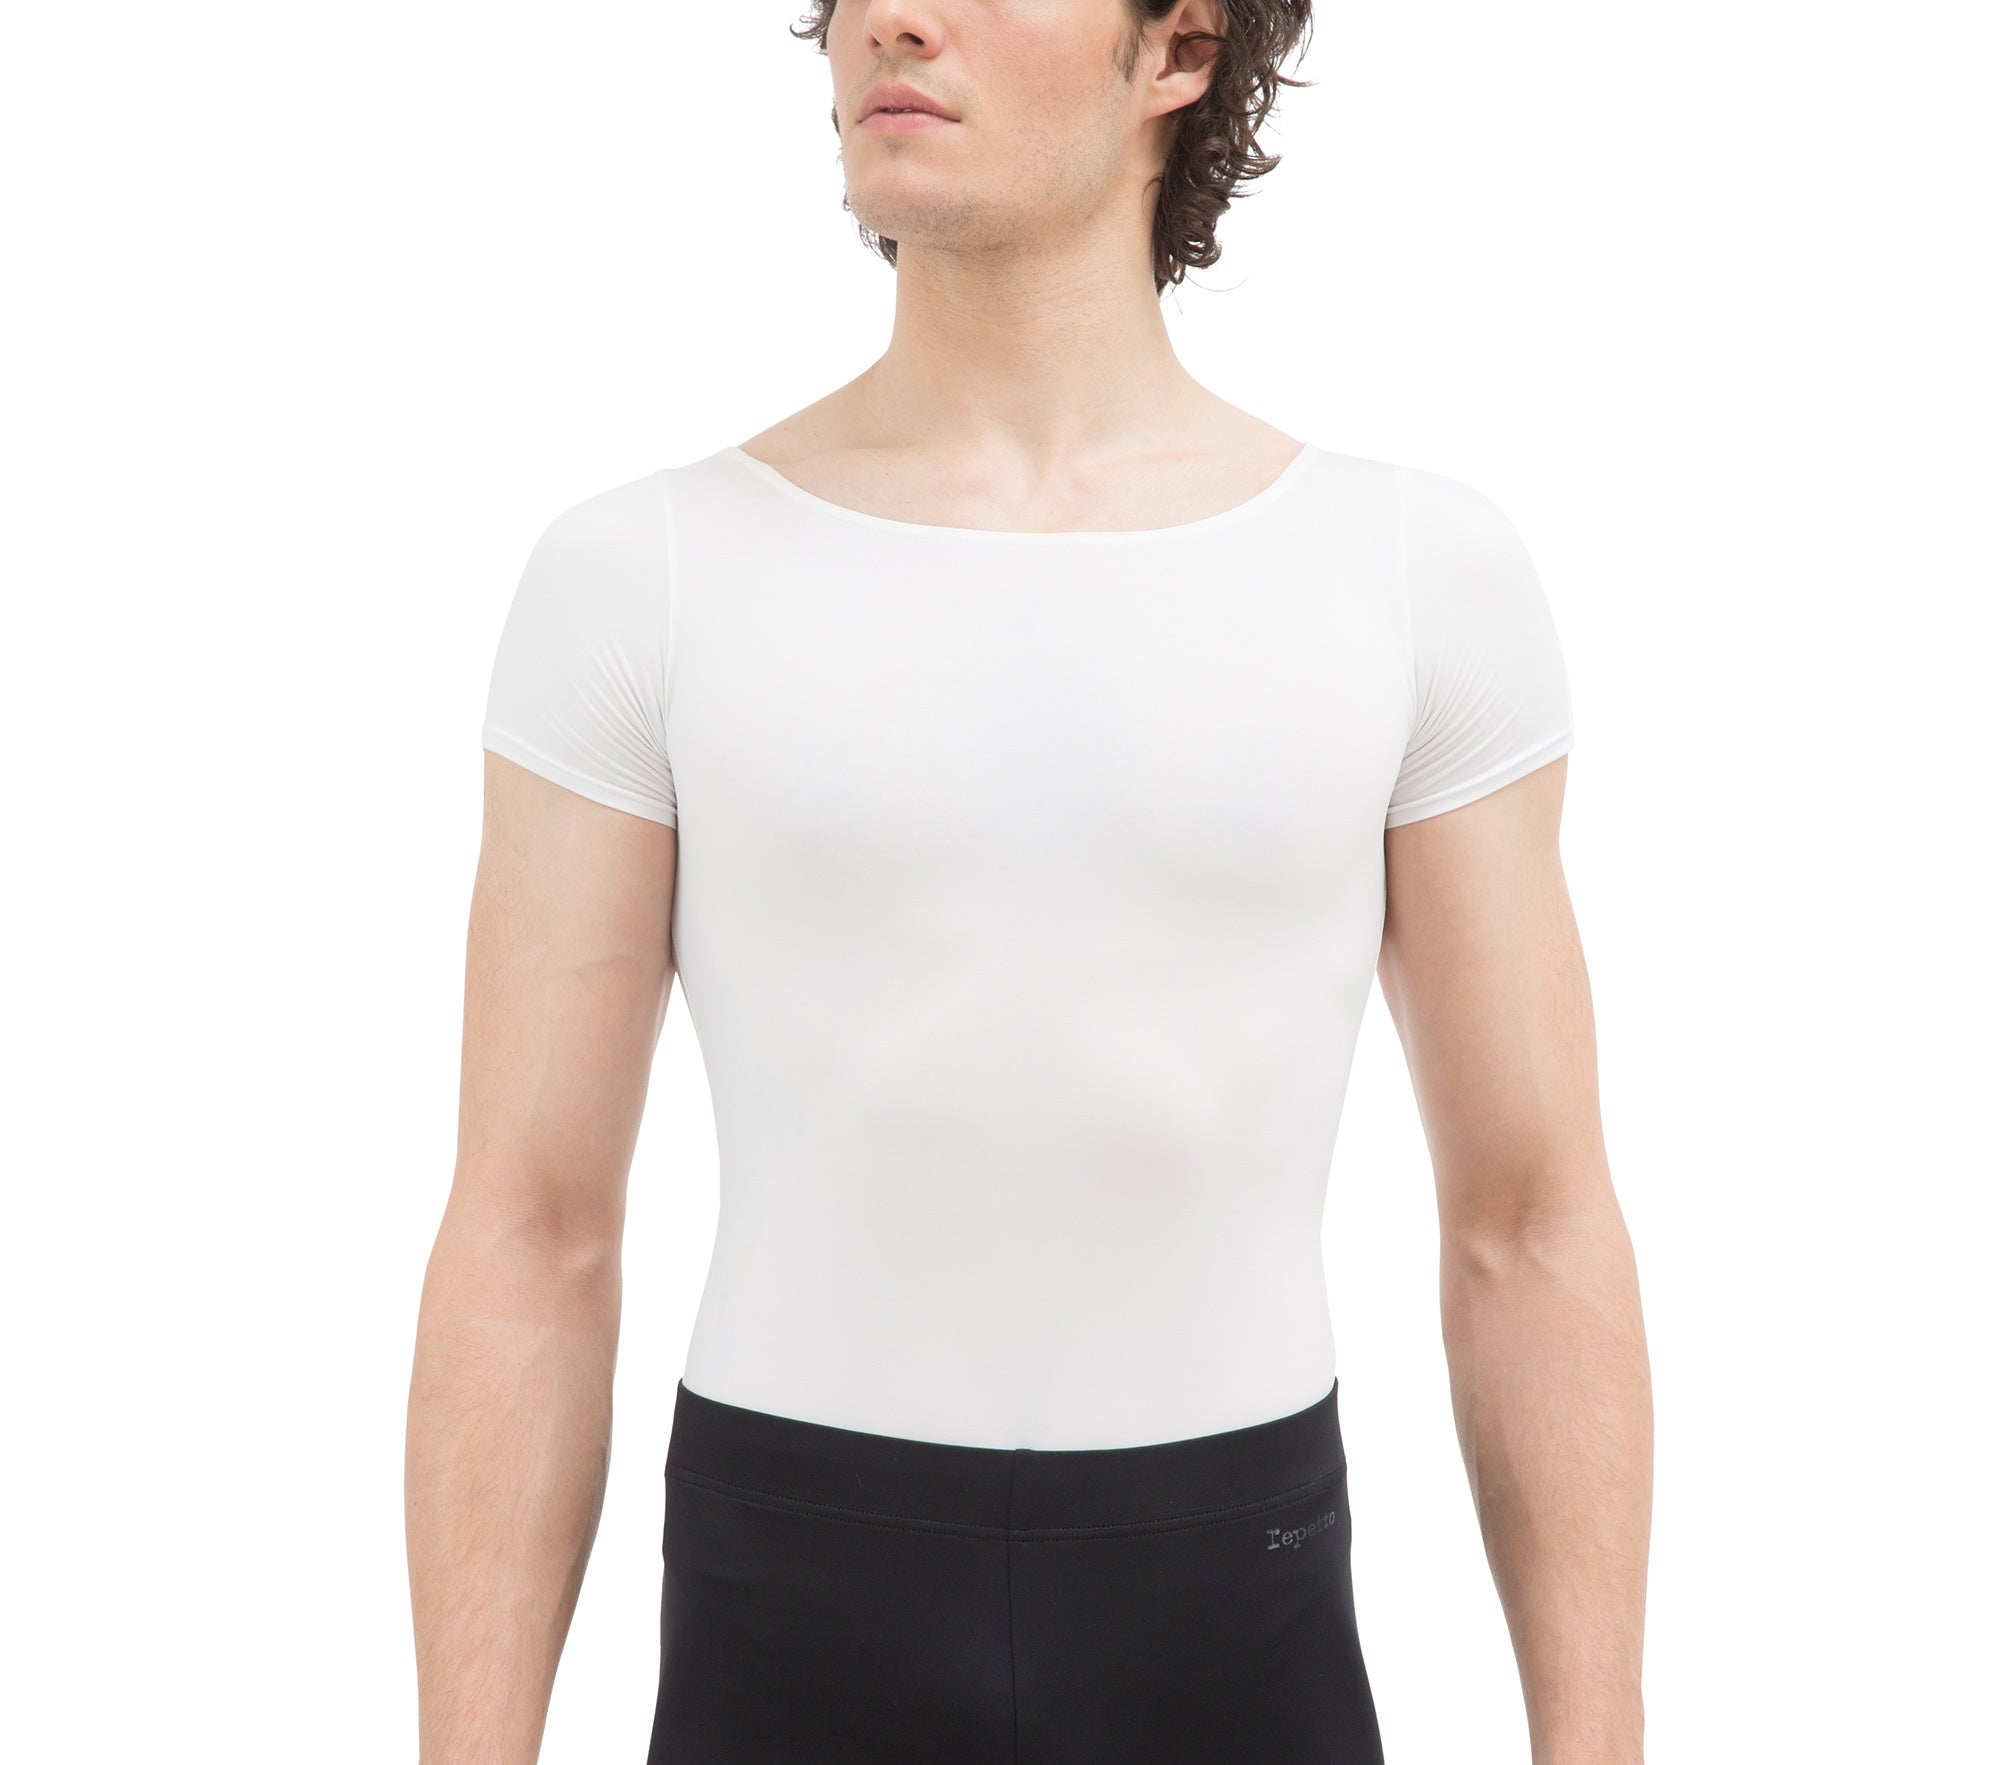 Justaucorps manches courtes - Homme Blanc